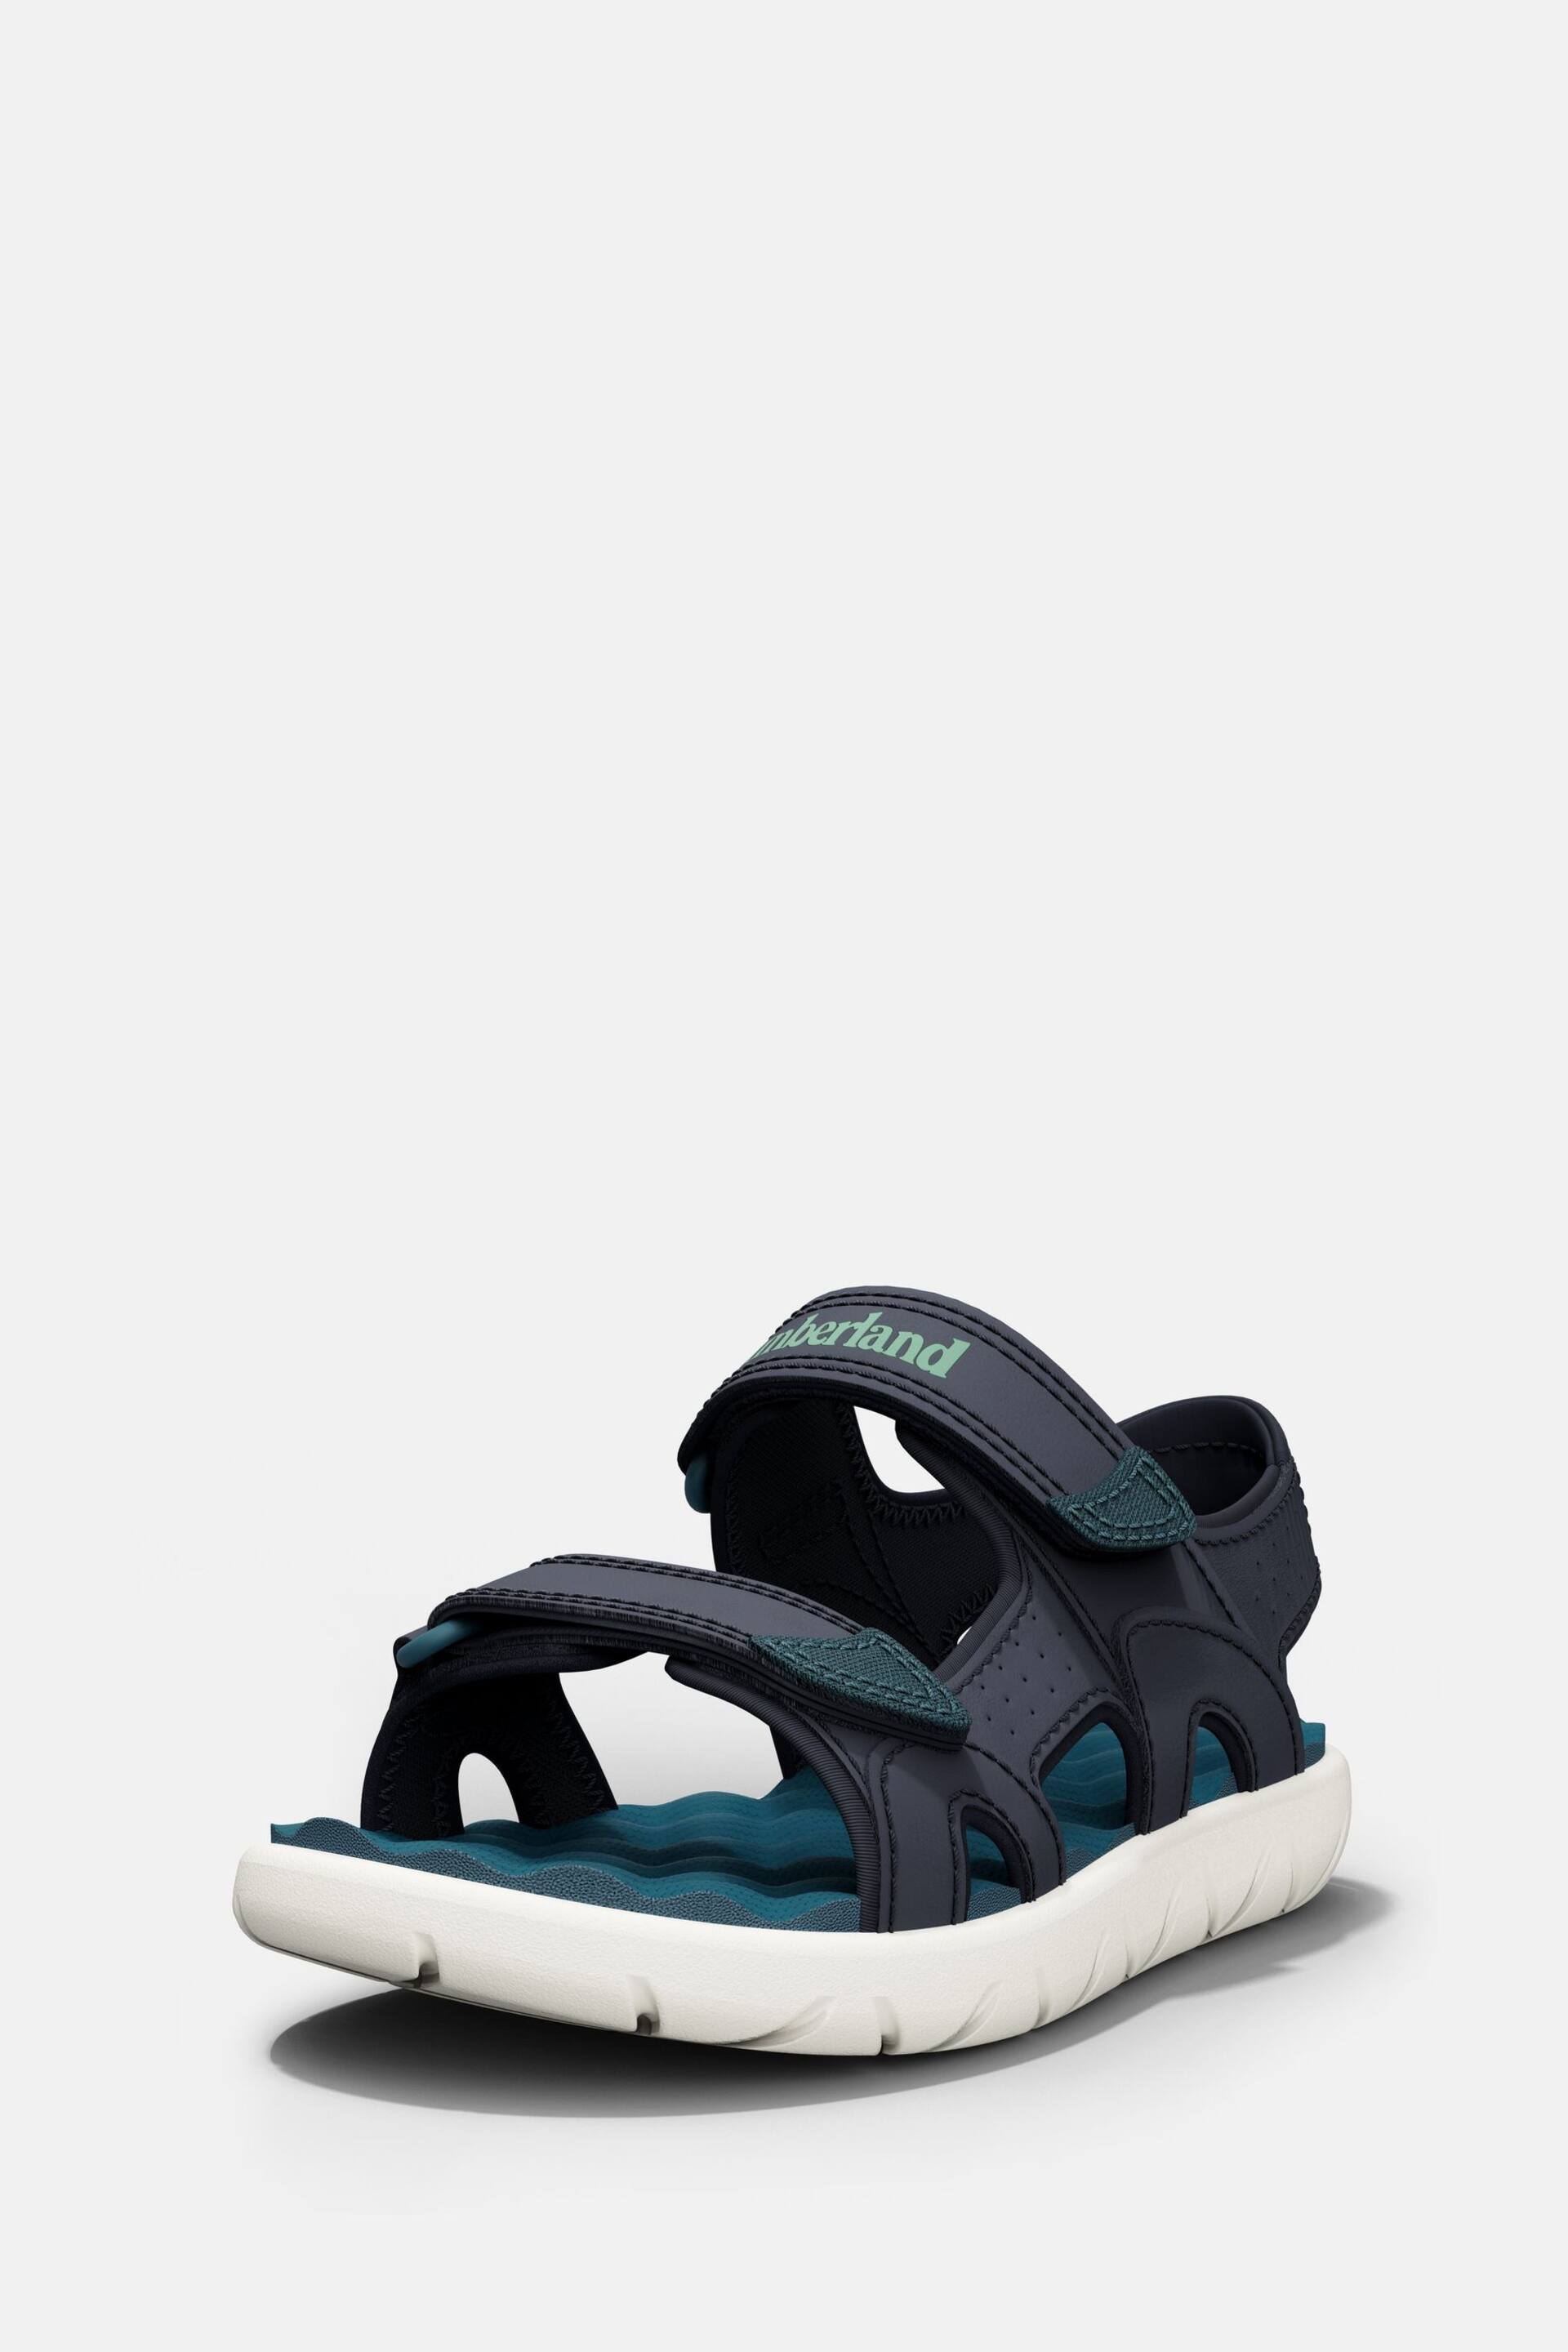 Timberland Blue Perkins Row Sandals - Image 2 of 6